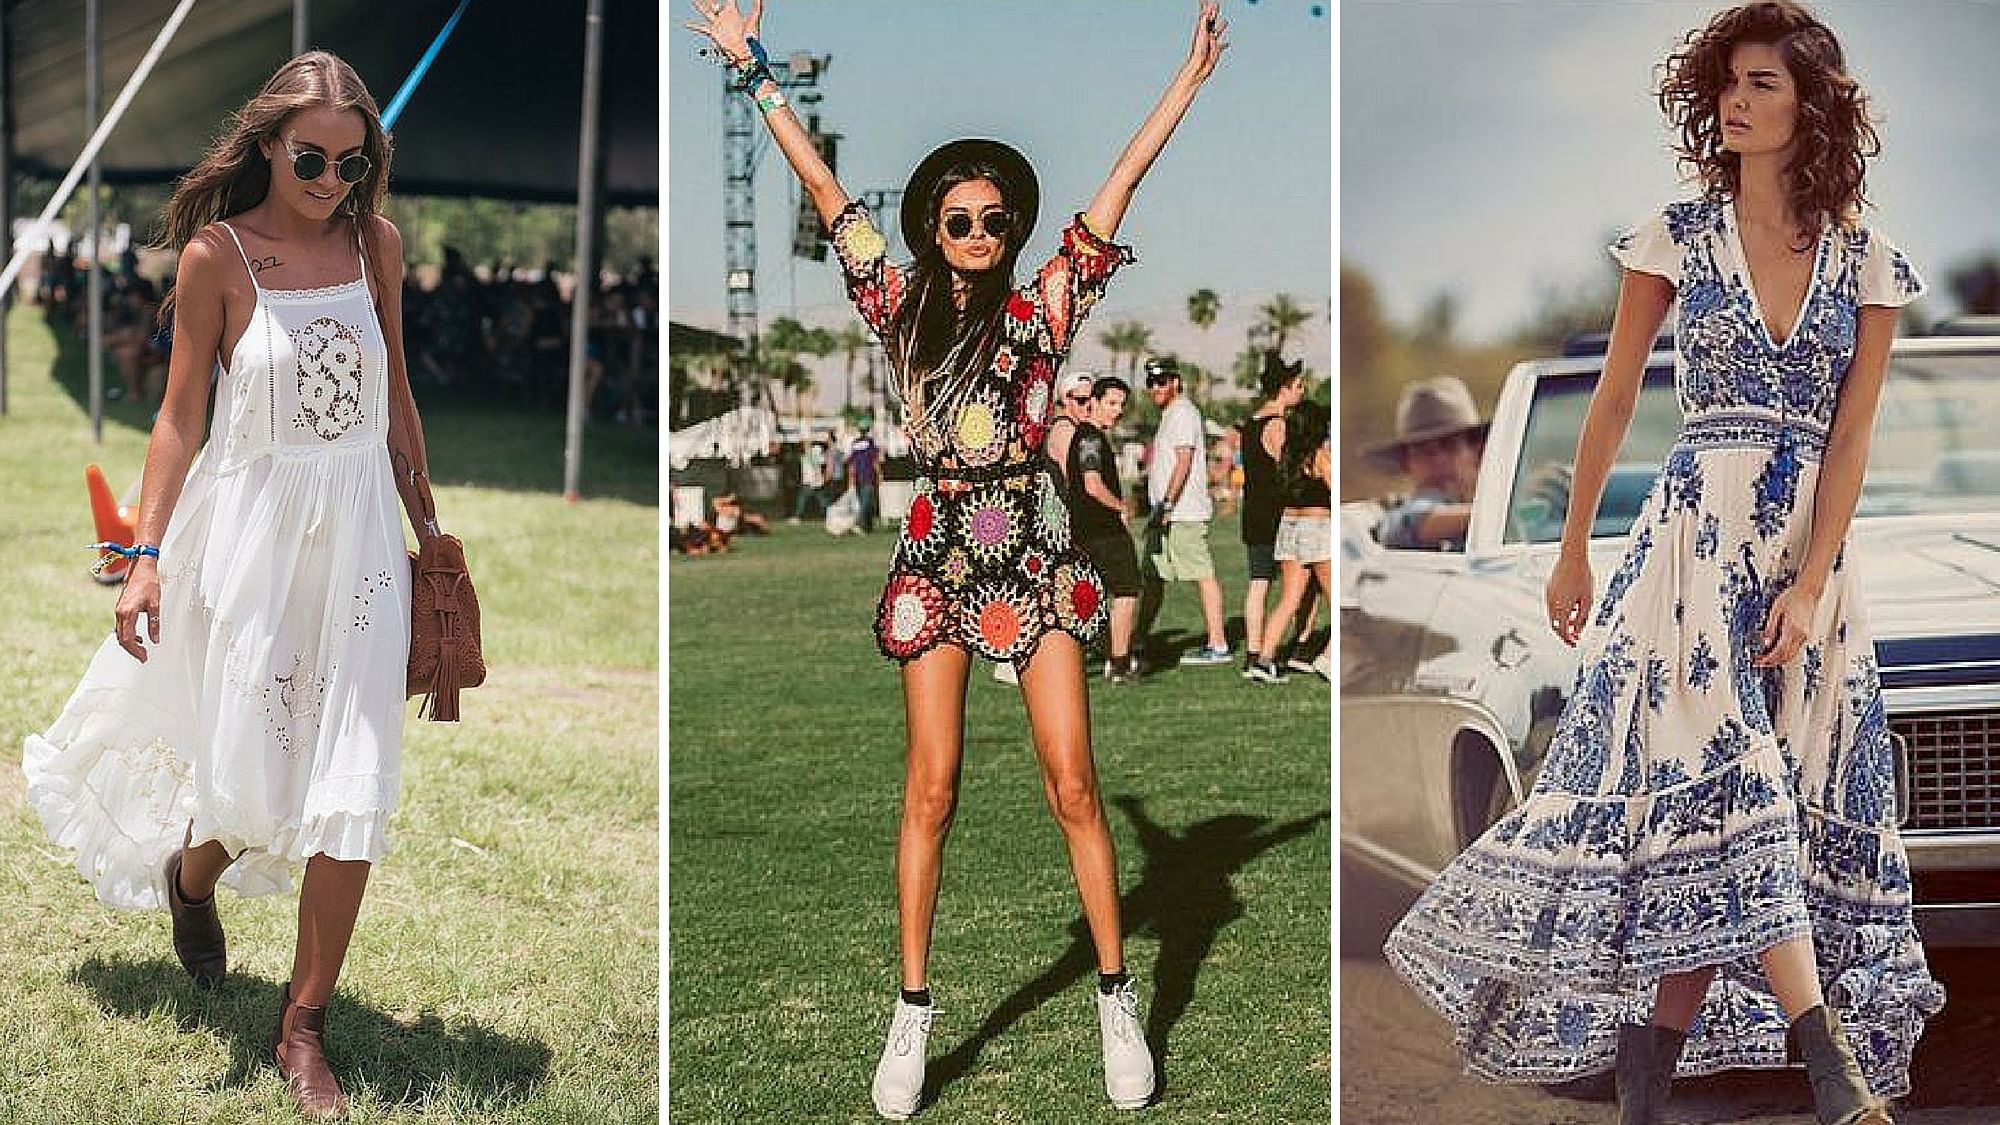 Put together some of the classic looks at your favourite summer music fest. (Photo Courtesy: Pinterest)